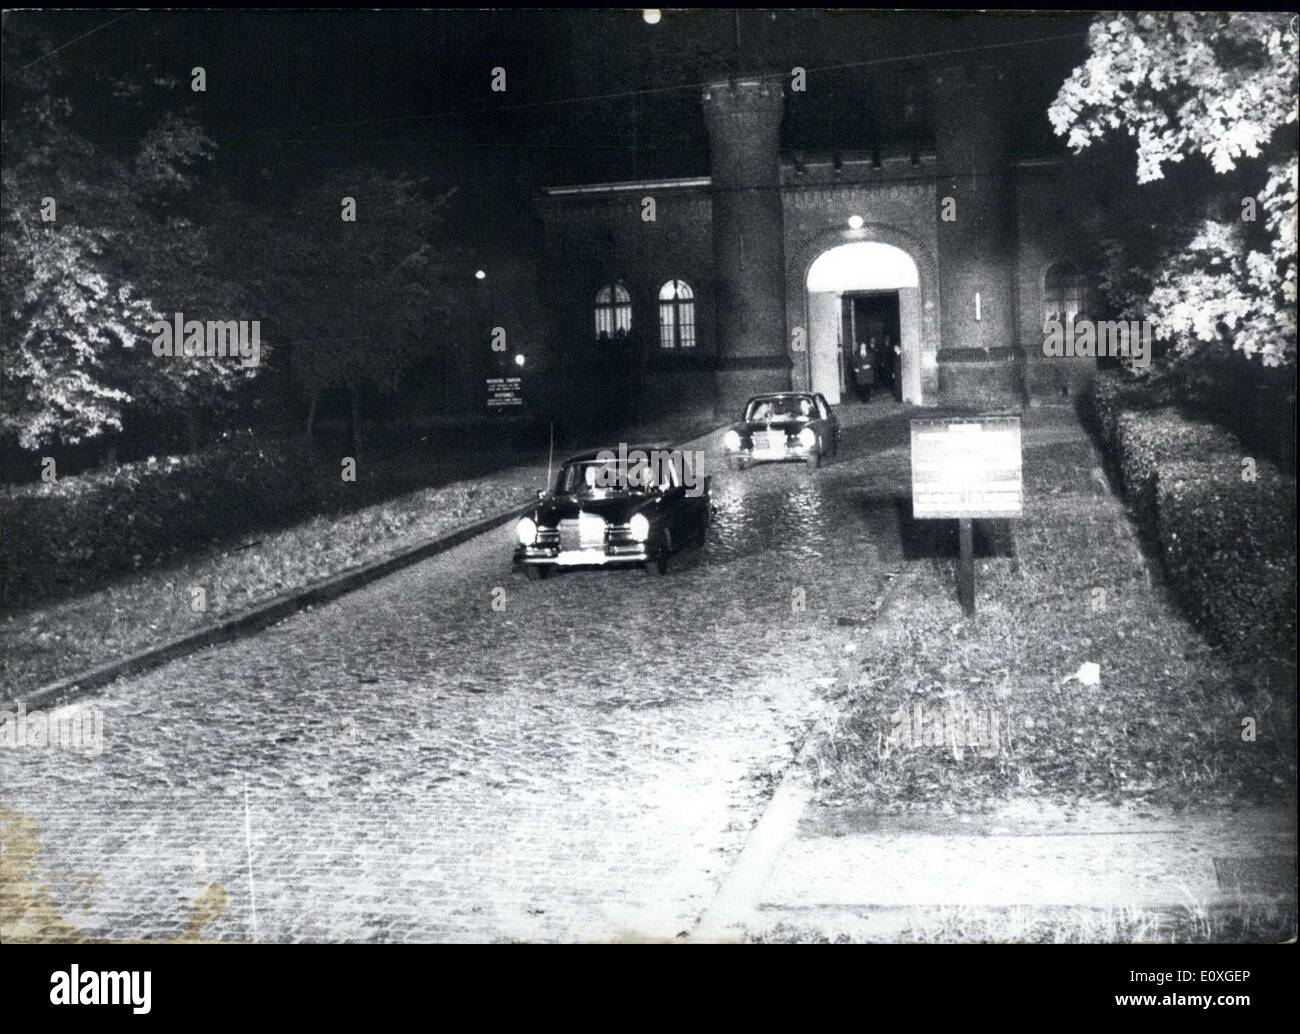 Oct. 01, 1966 - The dismissed minister for armament Albert Spaer after his release from Spandau prison after 20 years. At midnight - from Spandau prison in a closed car. Stock Photo